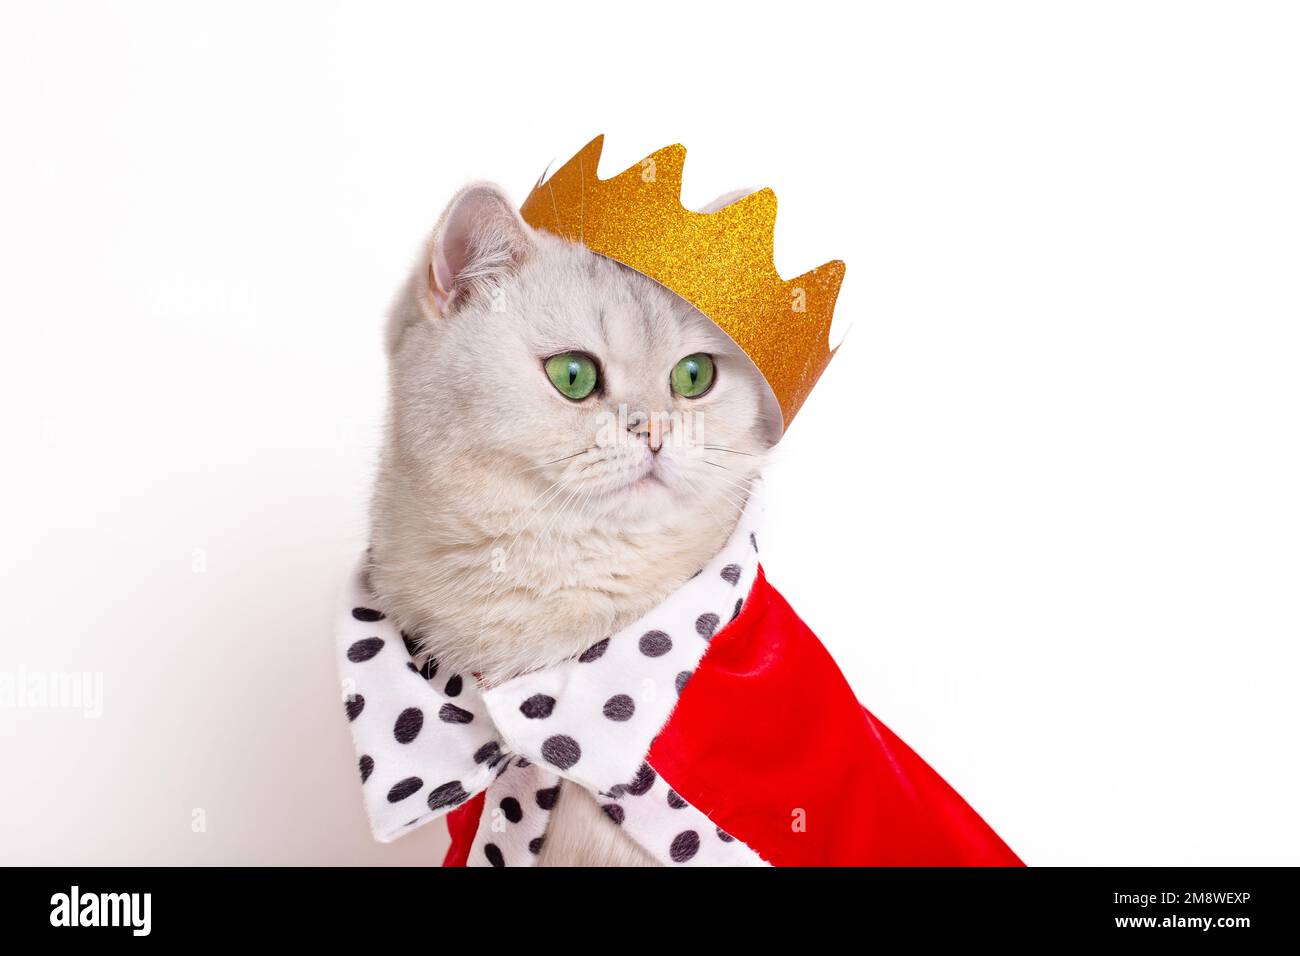 Funny white cat in a golden crown and red mantle on a white background Stock Photo